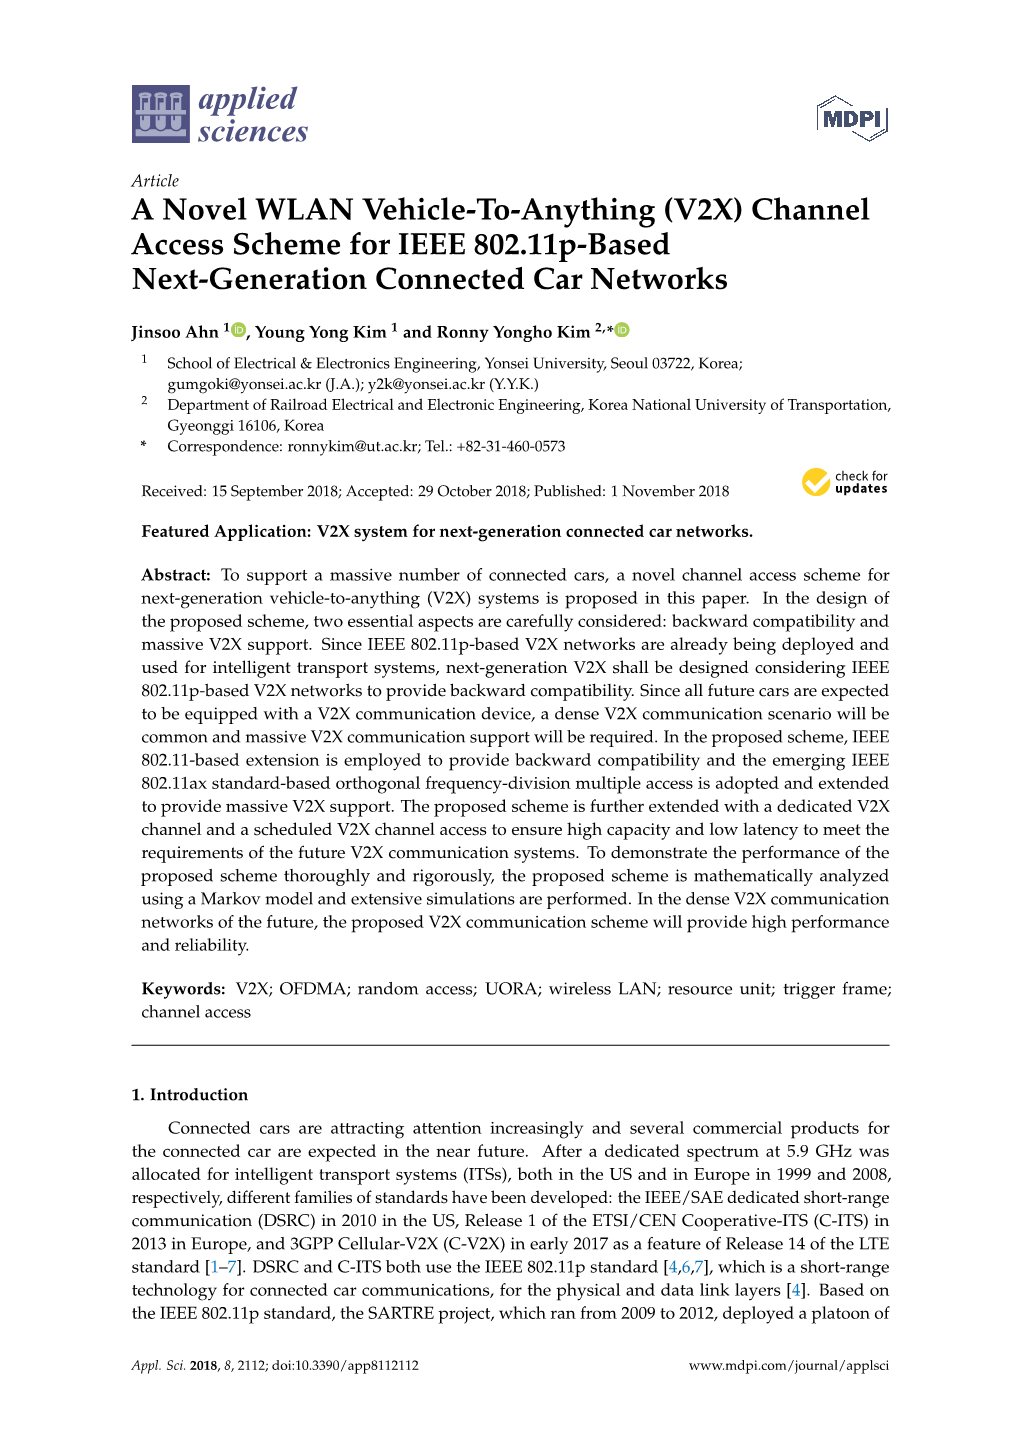 A Novel WLAN Vehicle-To-Anything (V2X) Channel Access Scheme for IEEE 802.11P-Based Next-Generation Connected Car Networks